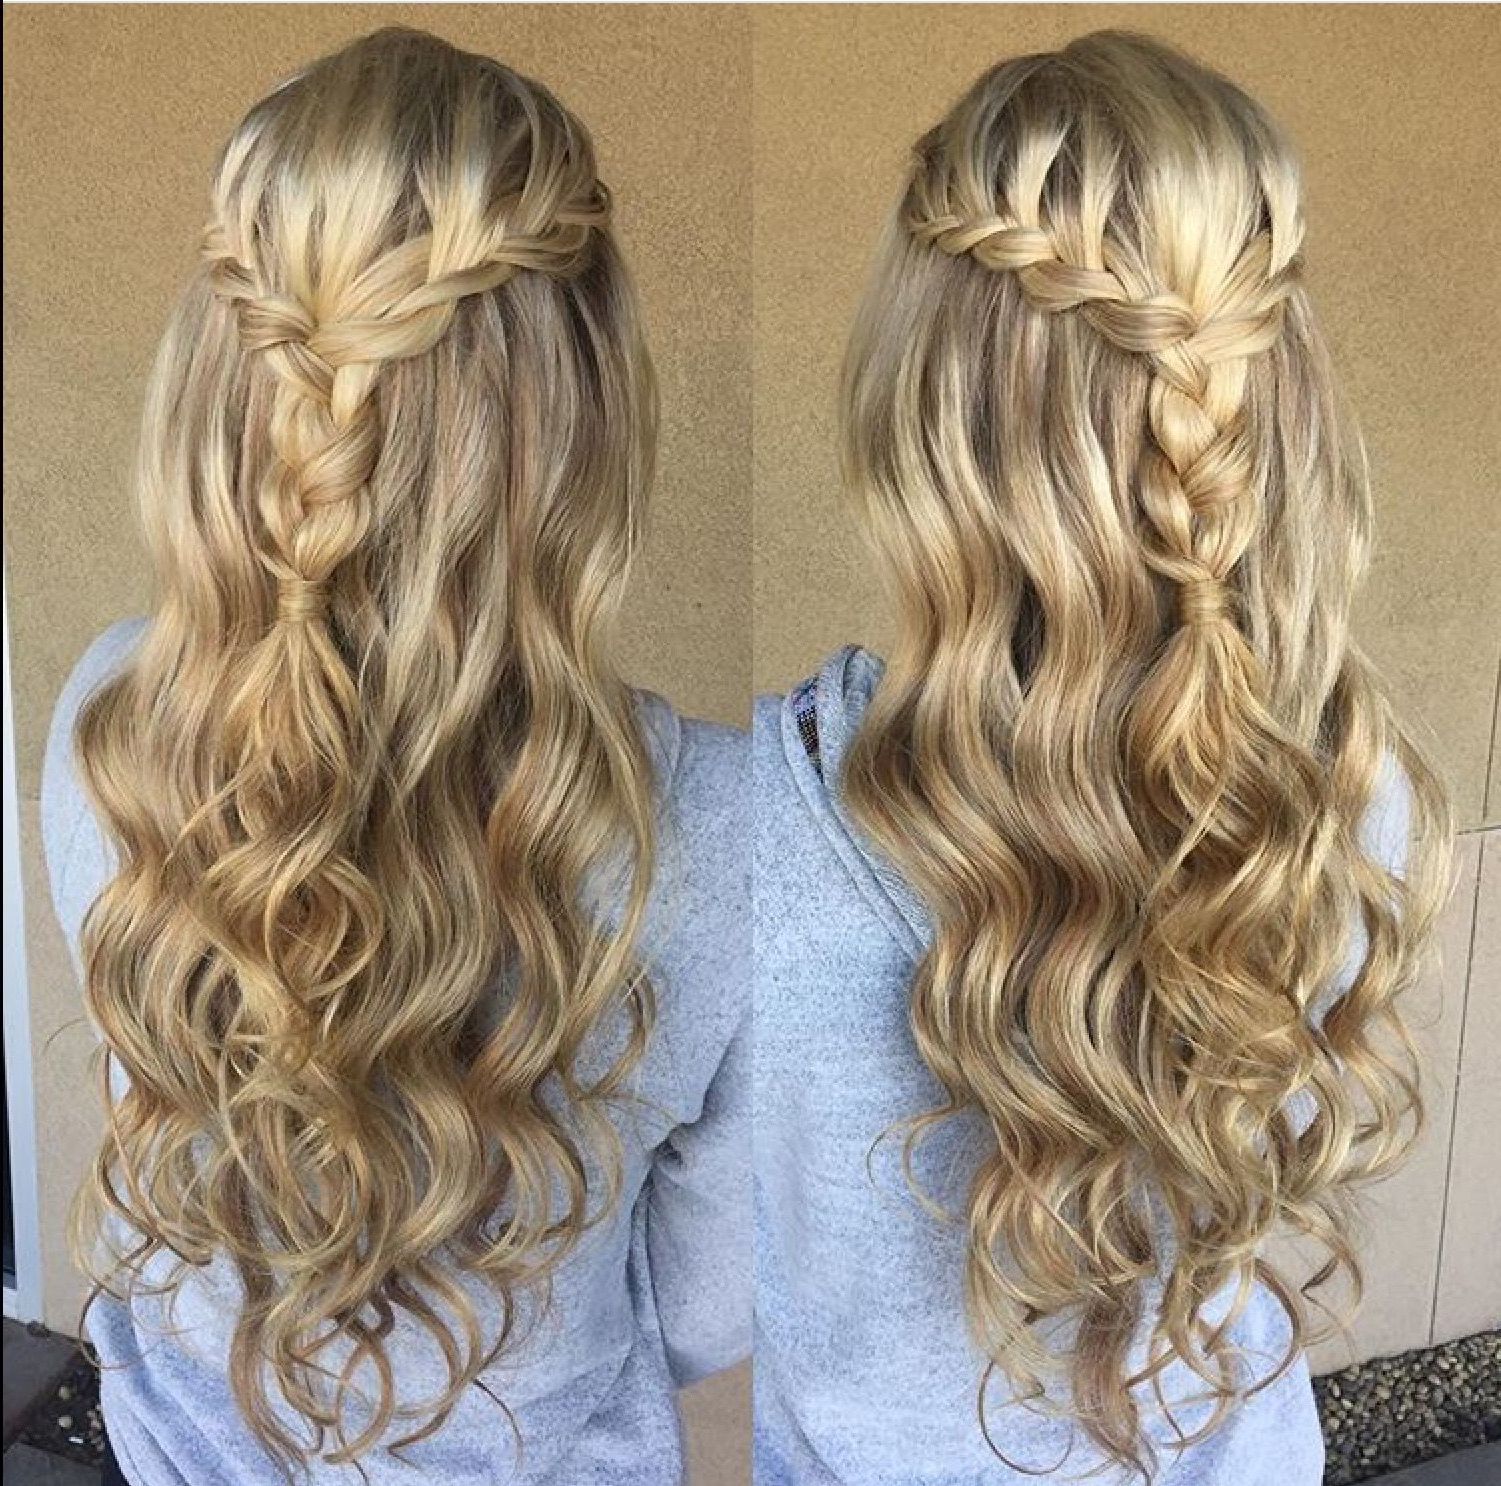 Hairstyles : Halfup Rosette Combo Homecoming Hairstyles Cute Girls Intended For Favorite Rosette Curls Prom Hairstyles (View 7 of 20)